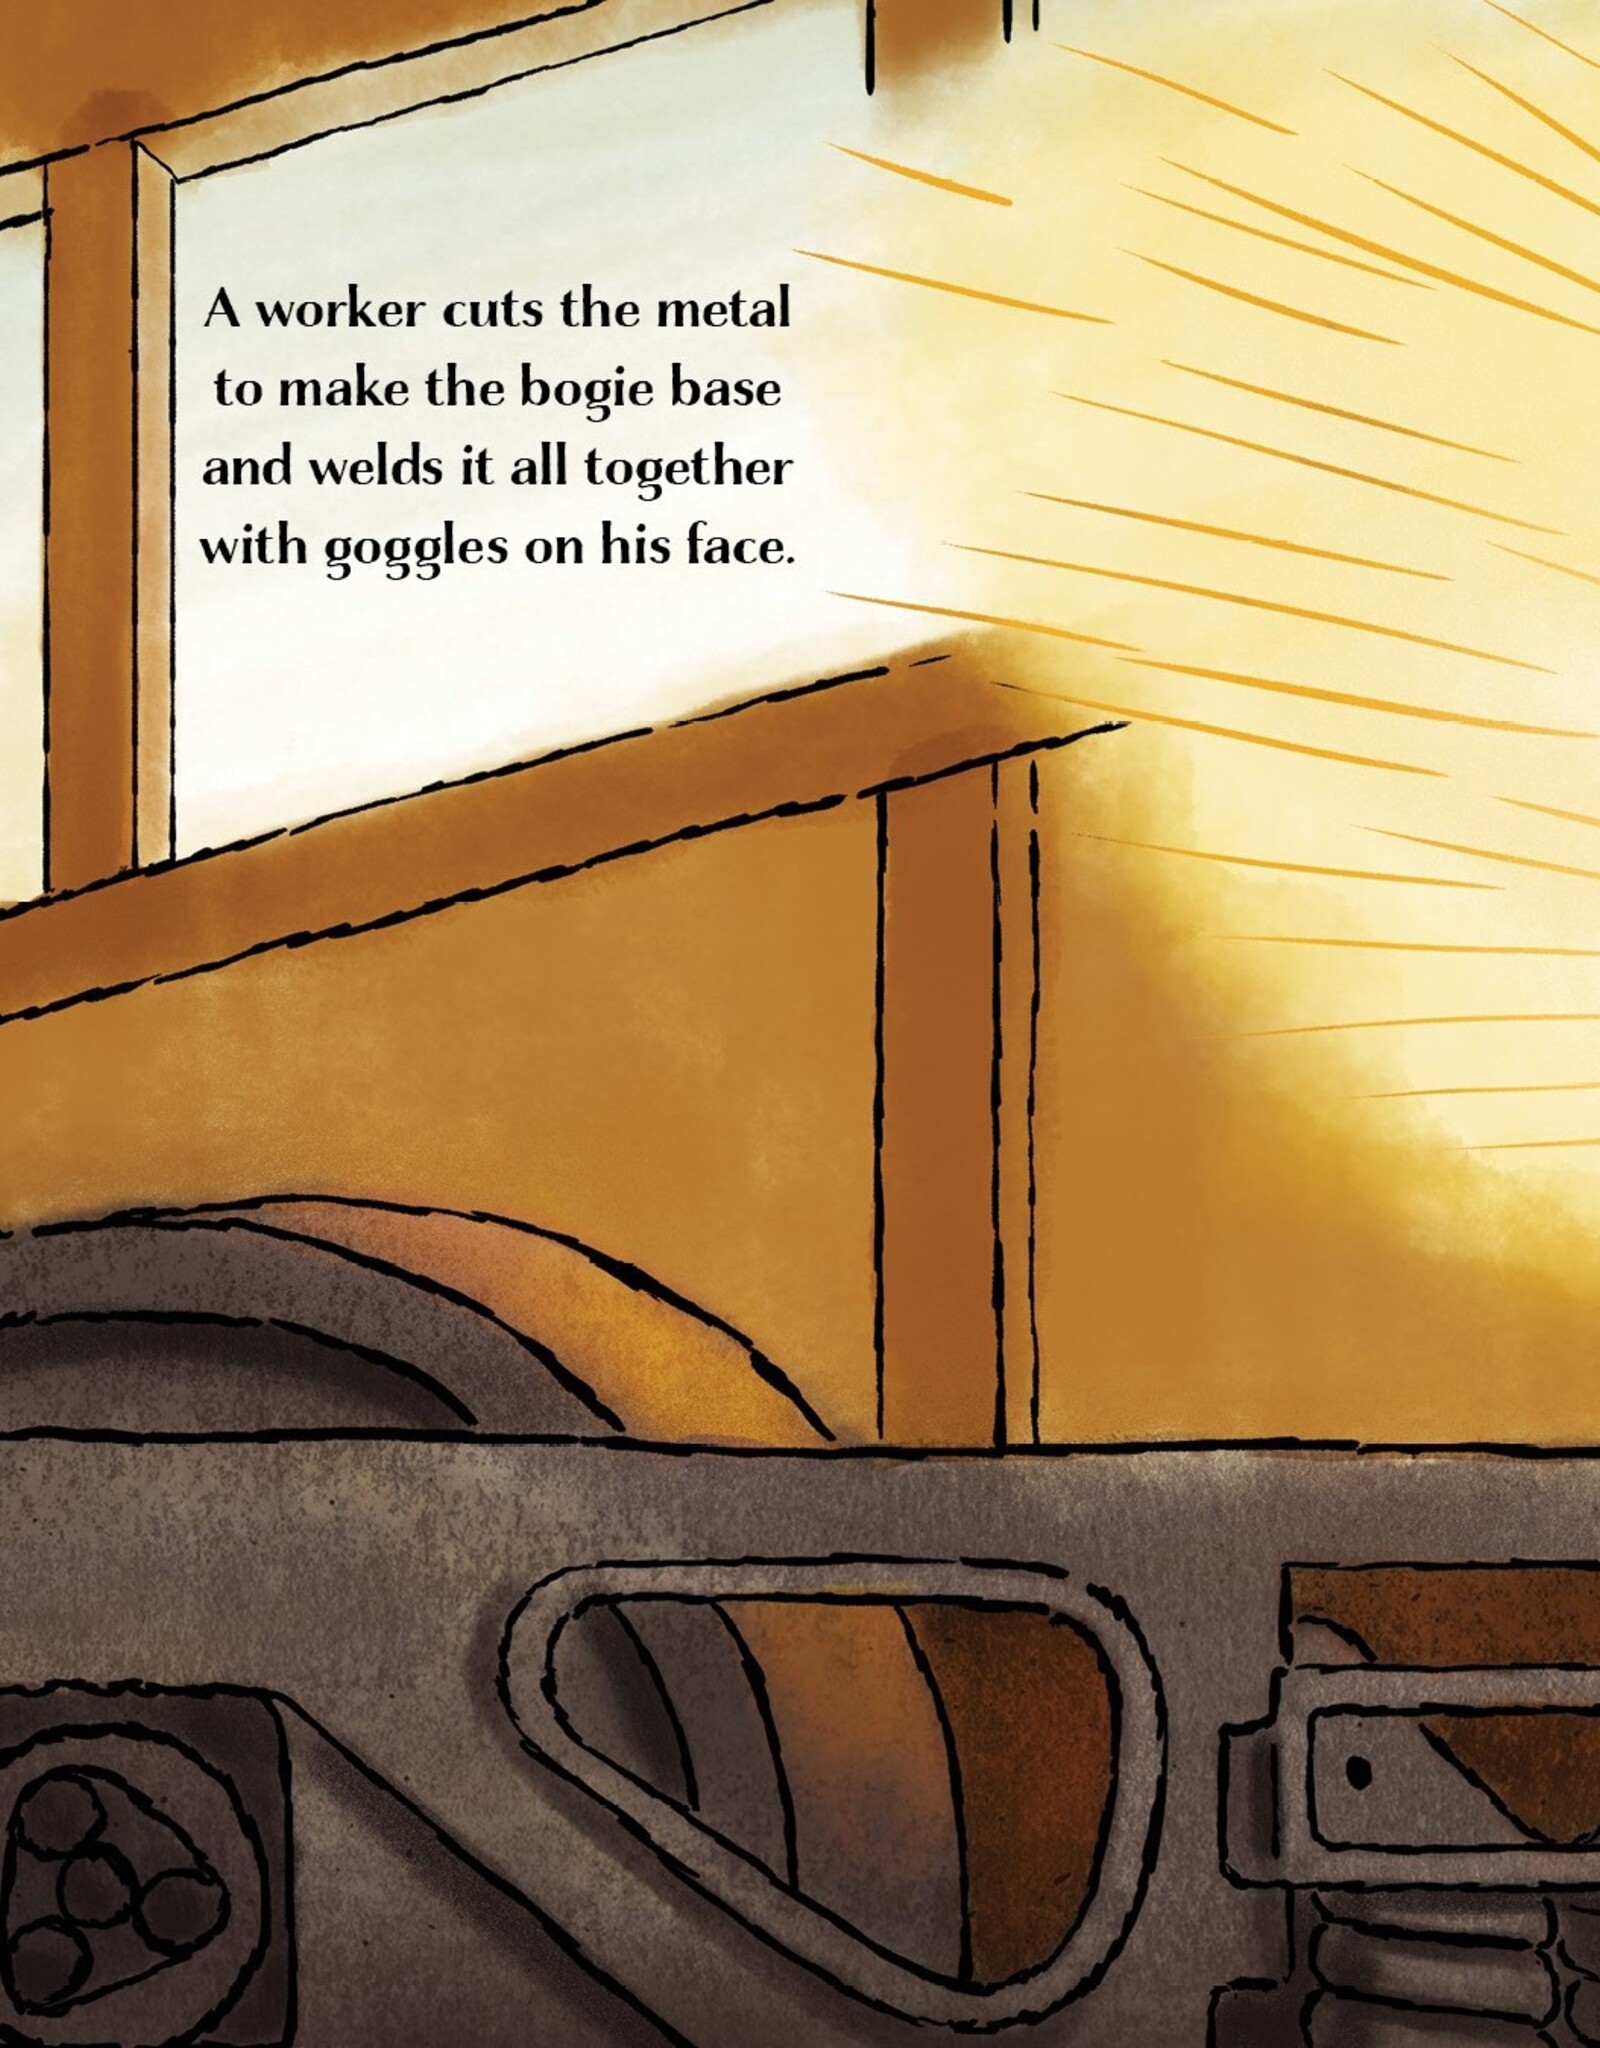 Sleeping Bear Press Let's Build a Little Train Picture Book